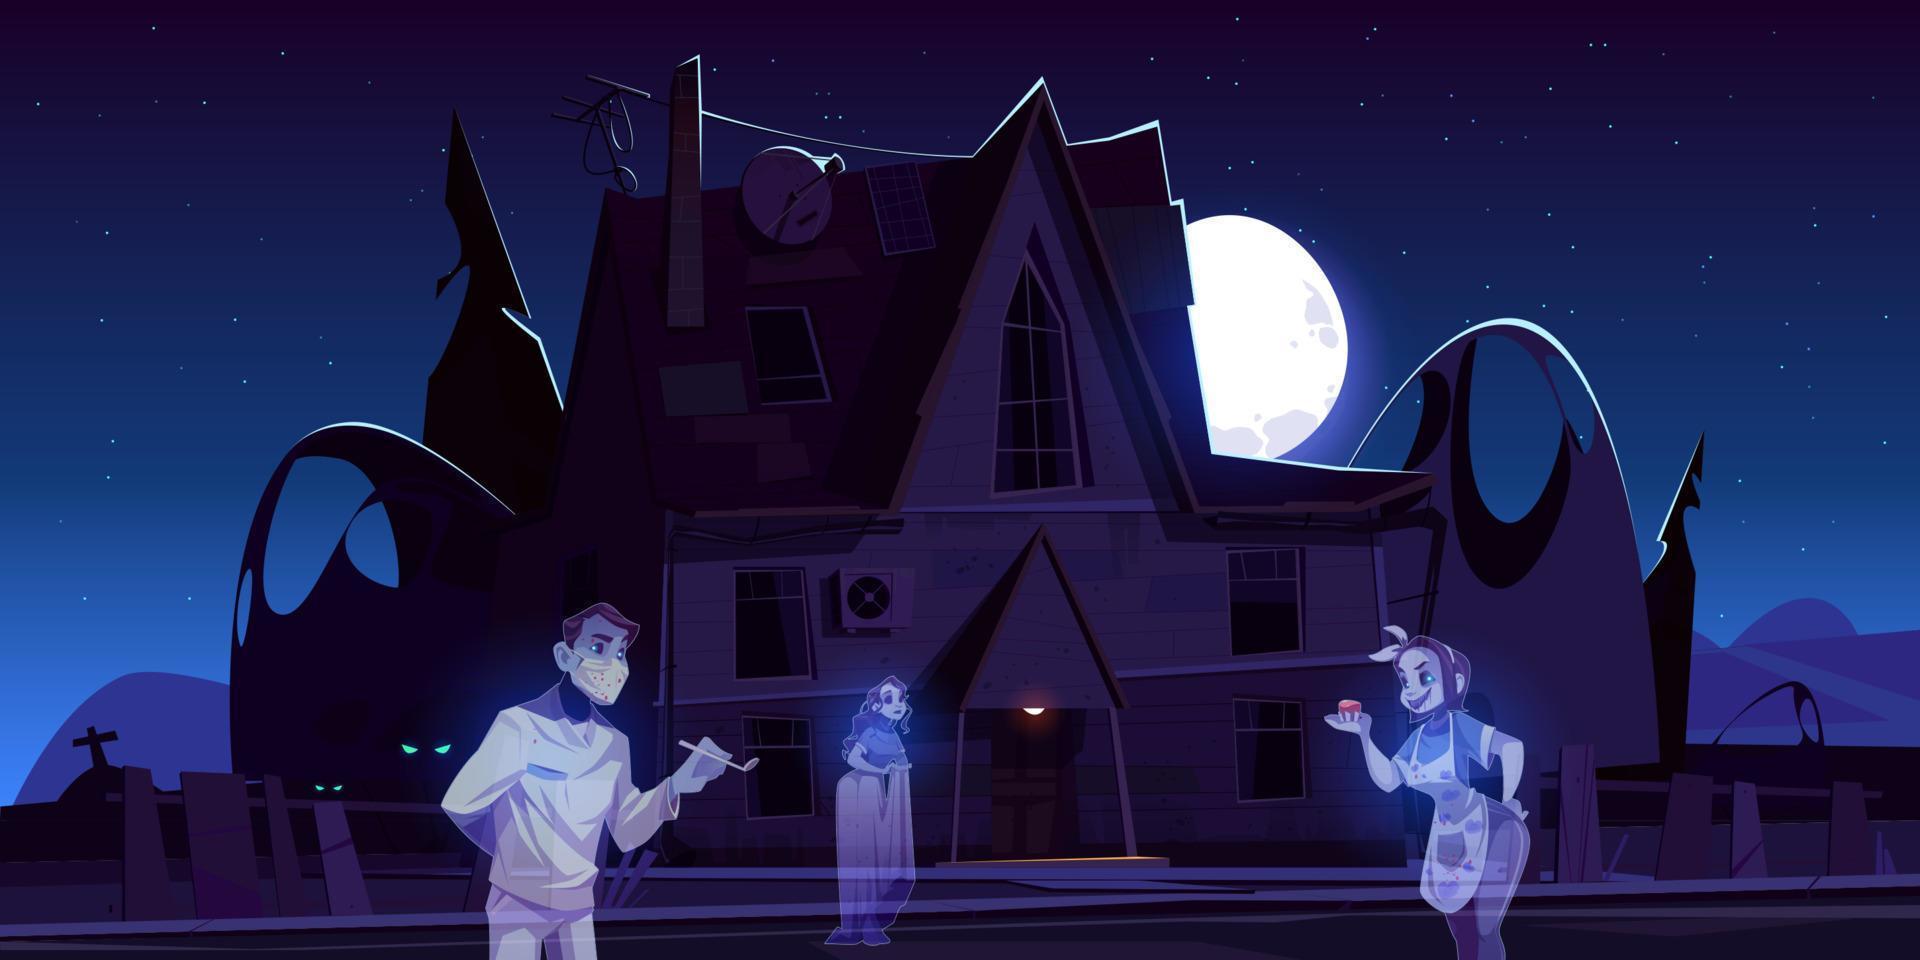 Scary old house with ghosts and cemetery at night vector